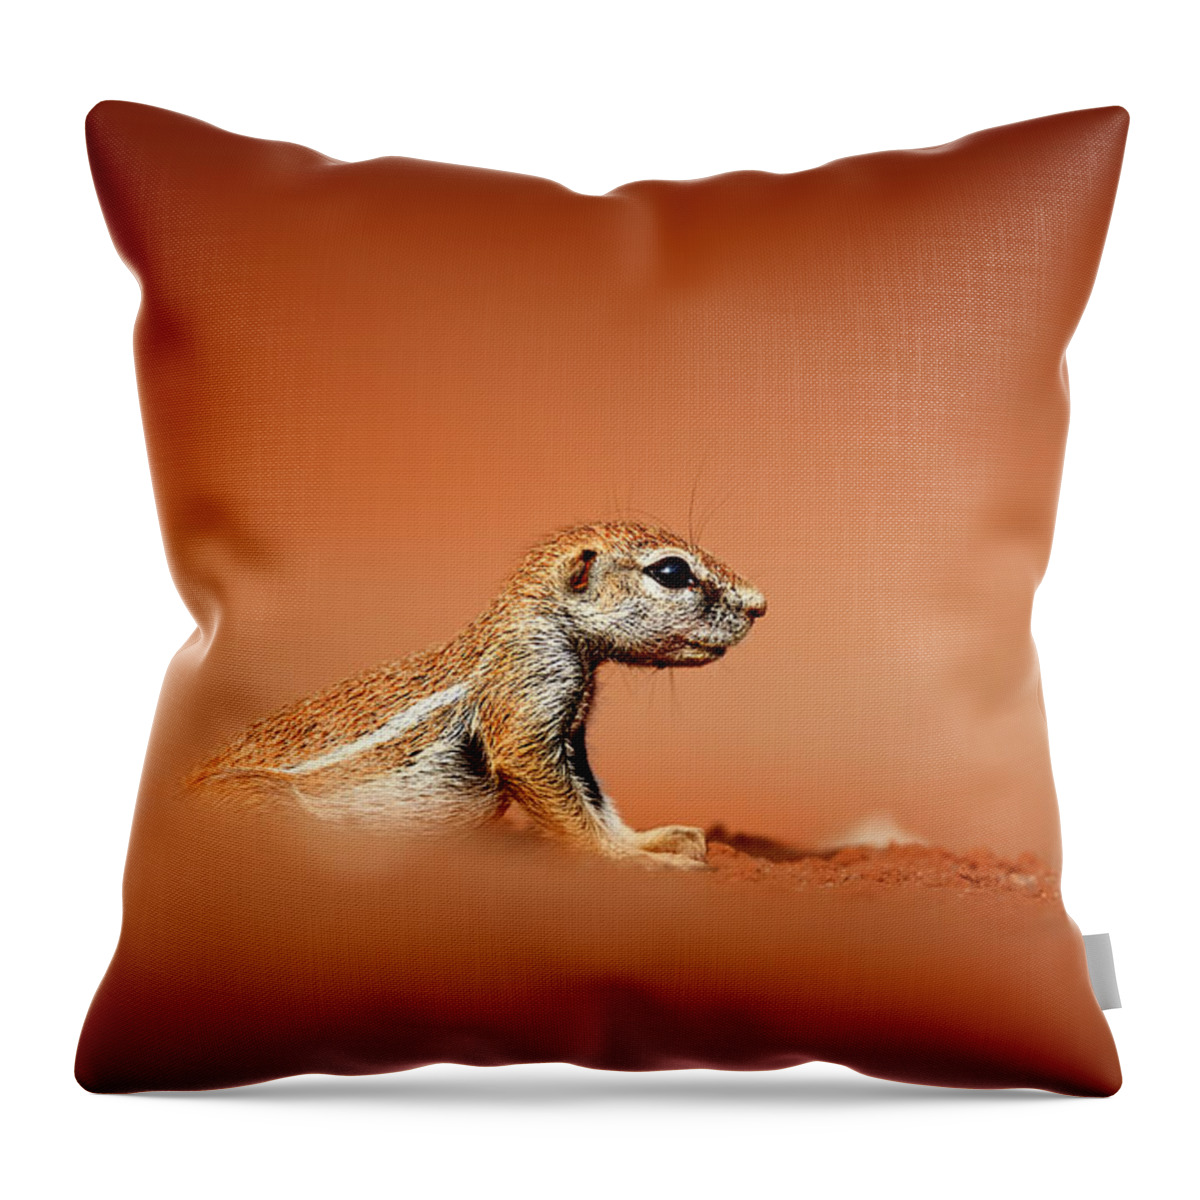 Squirrel Throw Pillow featuring the photograph Ground squirrel on red desert sand by Johan Swanepoel